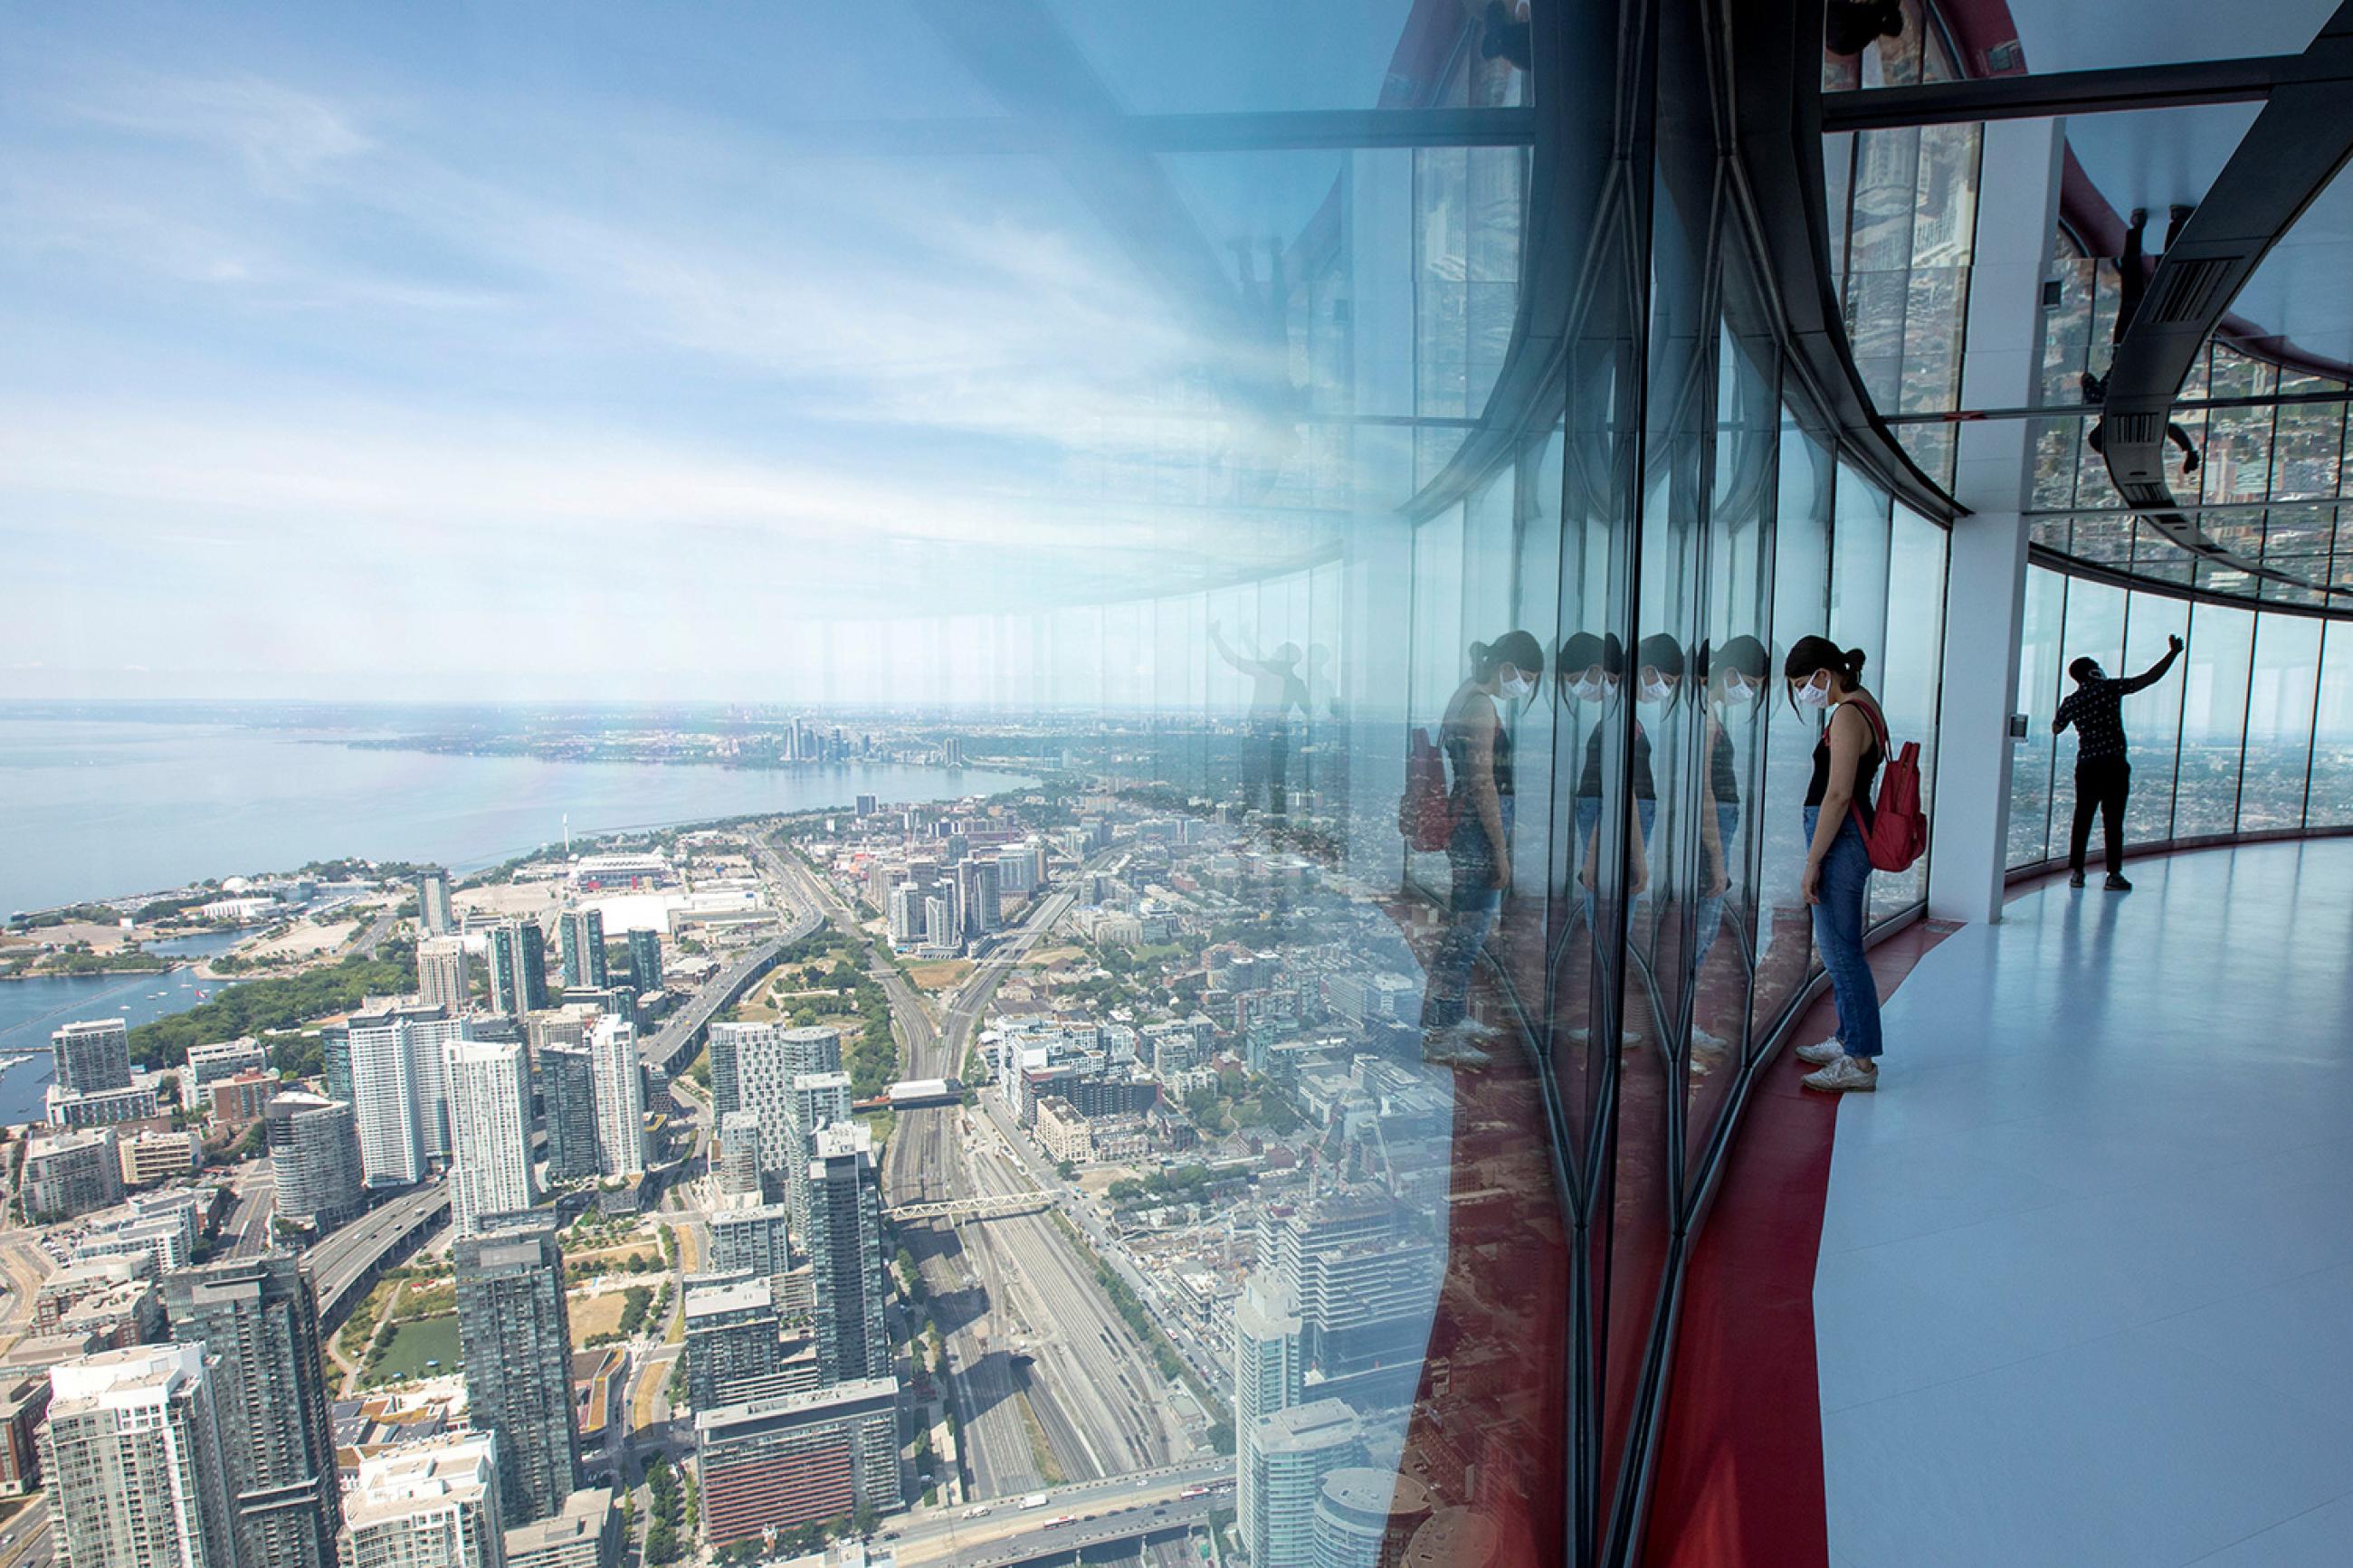 Bird's eye view: visitors take in a panoramic scene of the city of Toronto, Canada, from the 553 meters (1815 feet) high CN Tower, which just reopened after coronavirus restrictions on July 15, 2020. The photo shows a woman wearing a mask looking out from the skyview of the tall building with the Toronto cityscape beneath her. REUTERS/Carlos Osorio